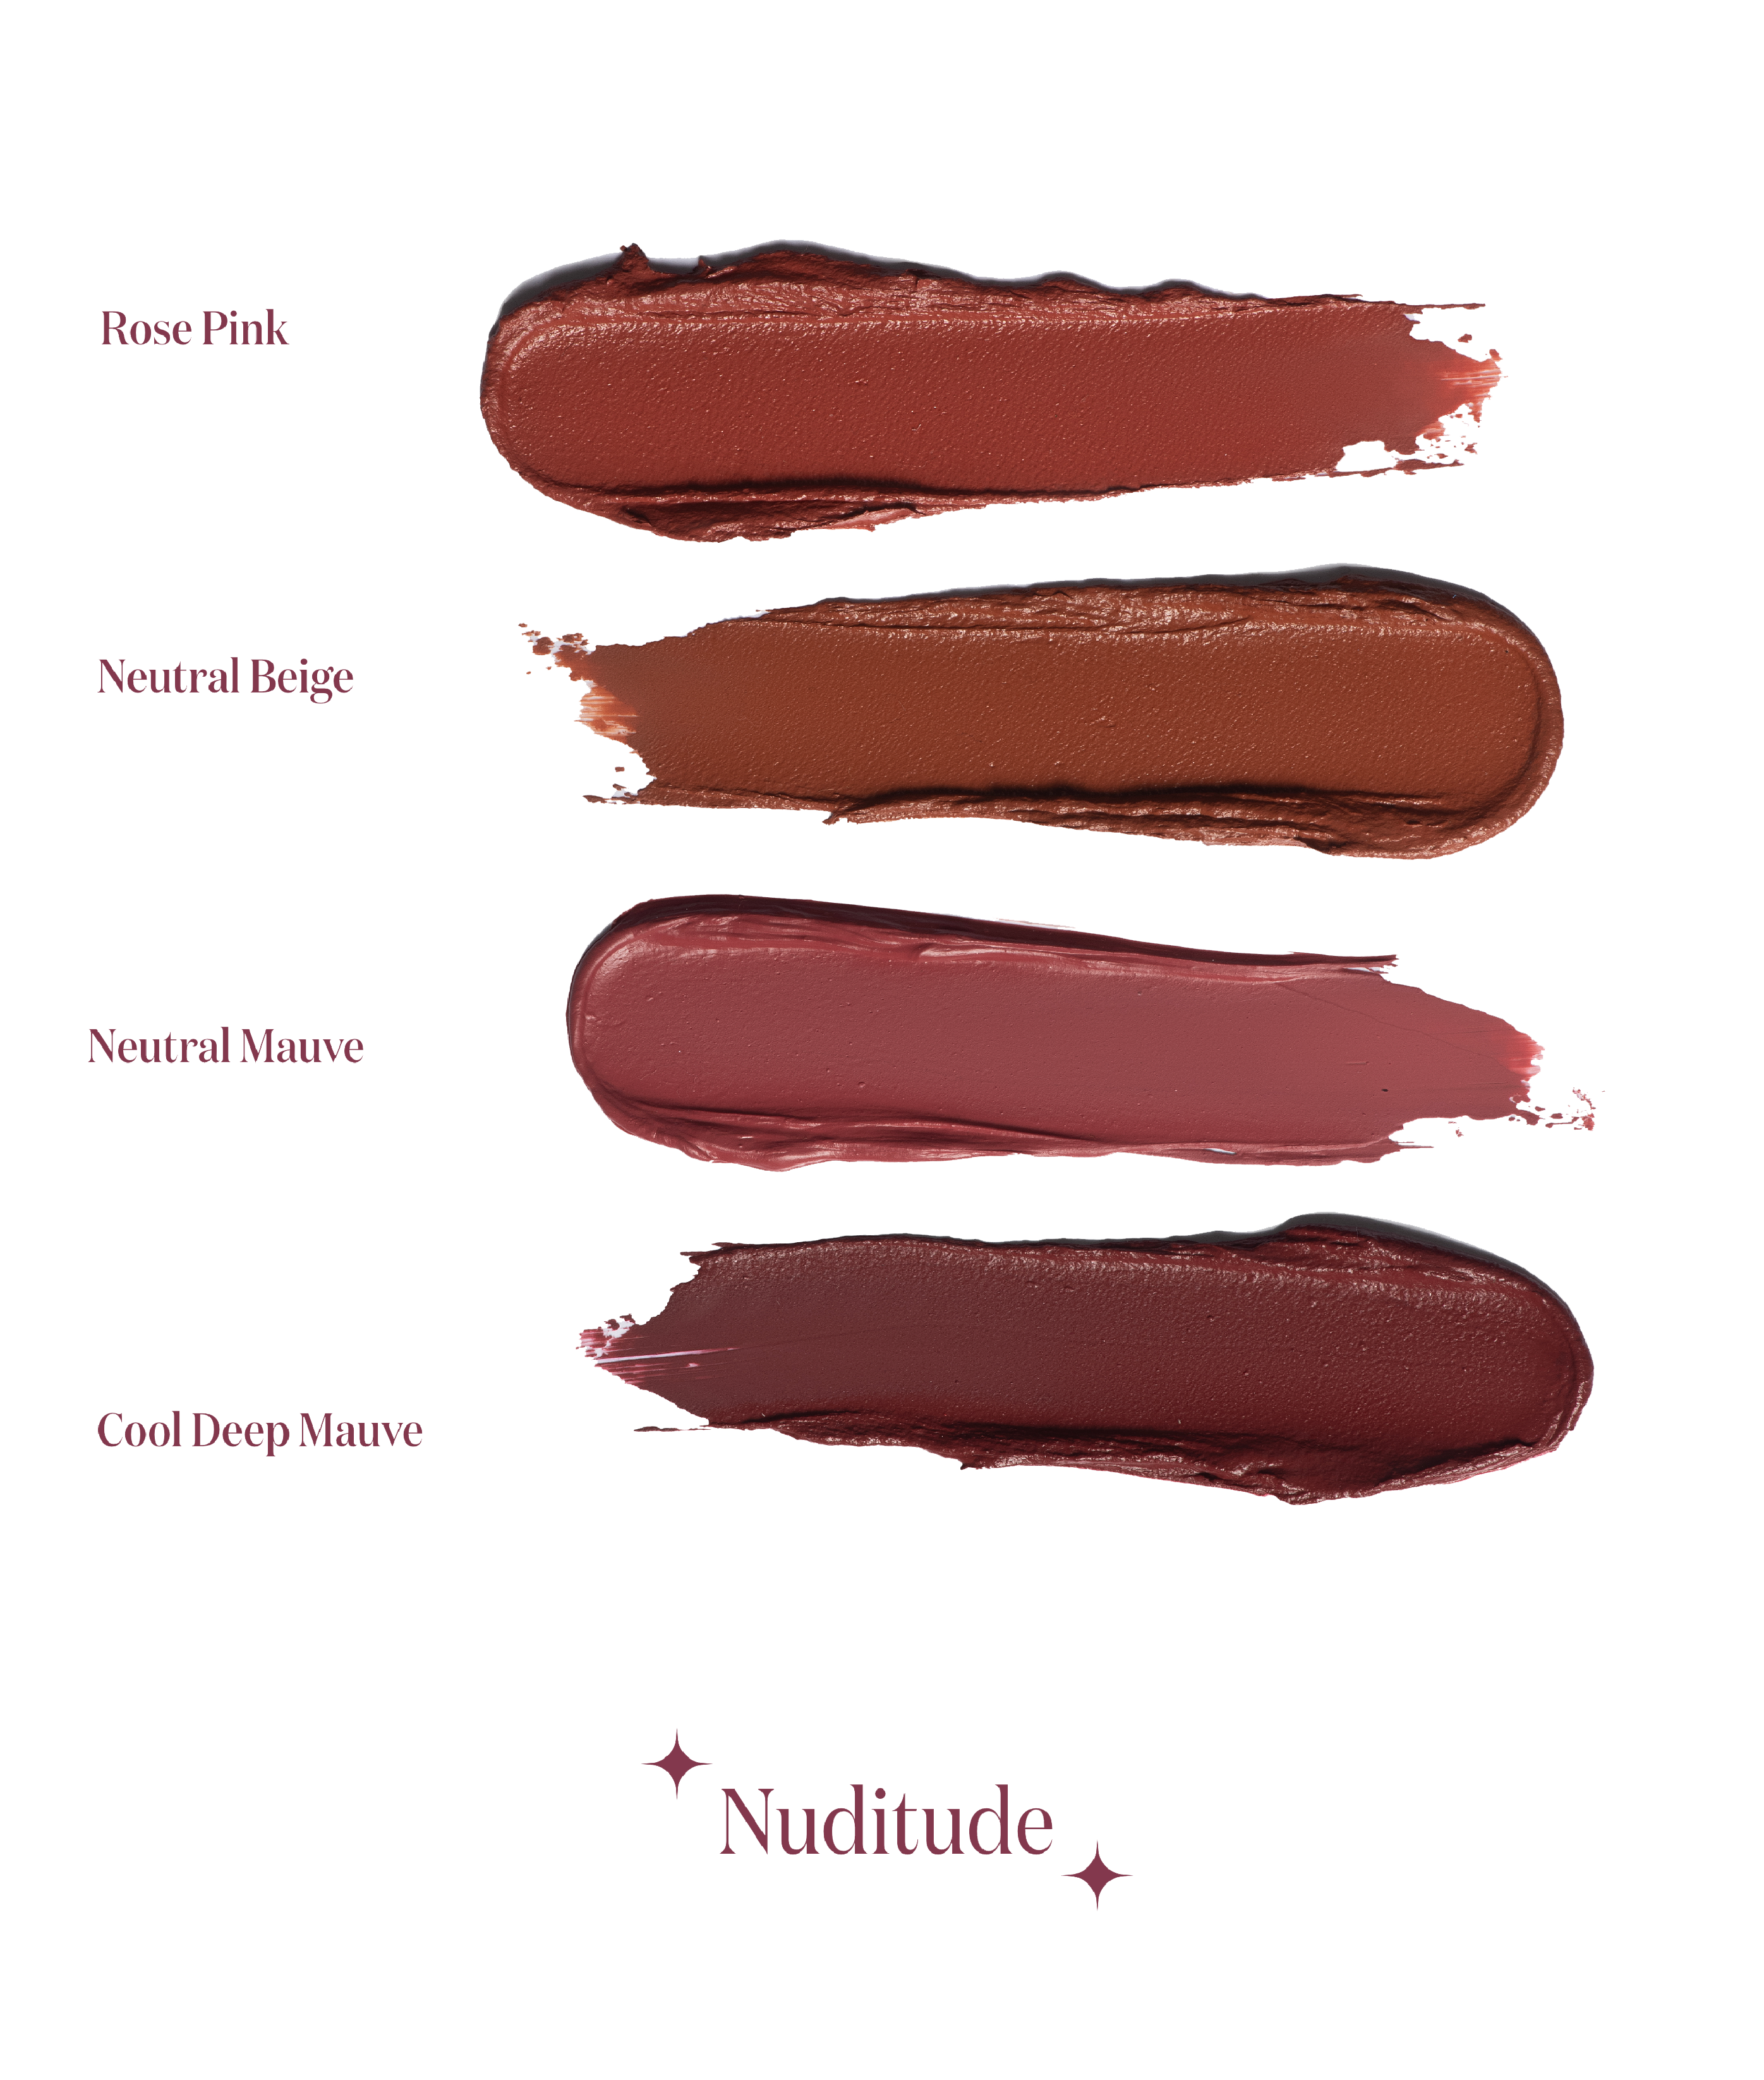 #color_nuditude - pink toned nudes